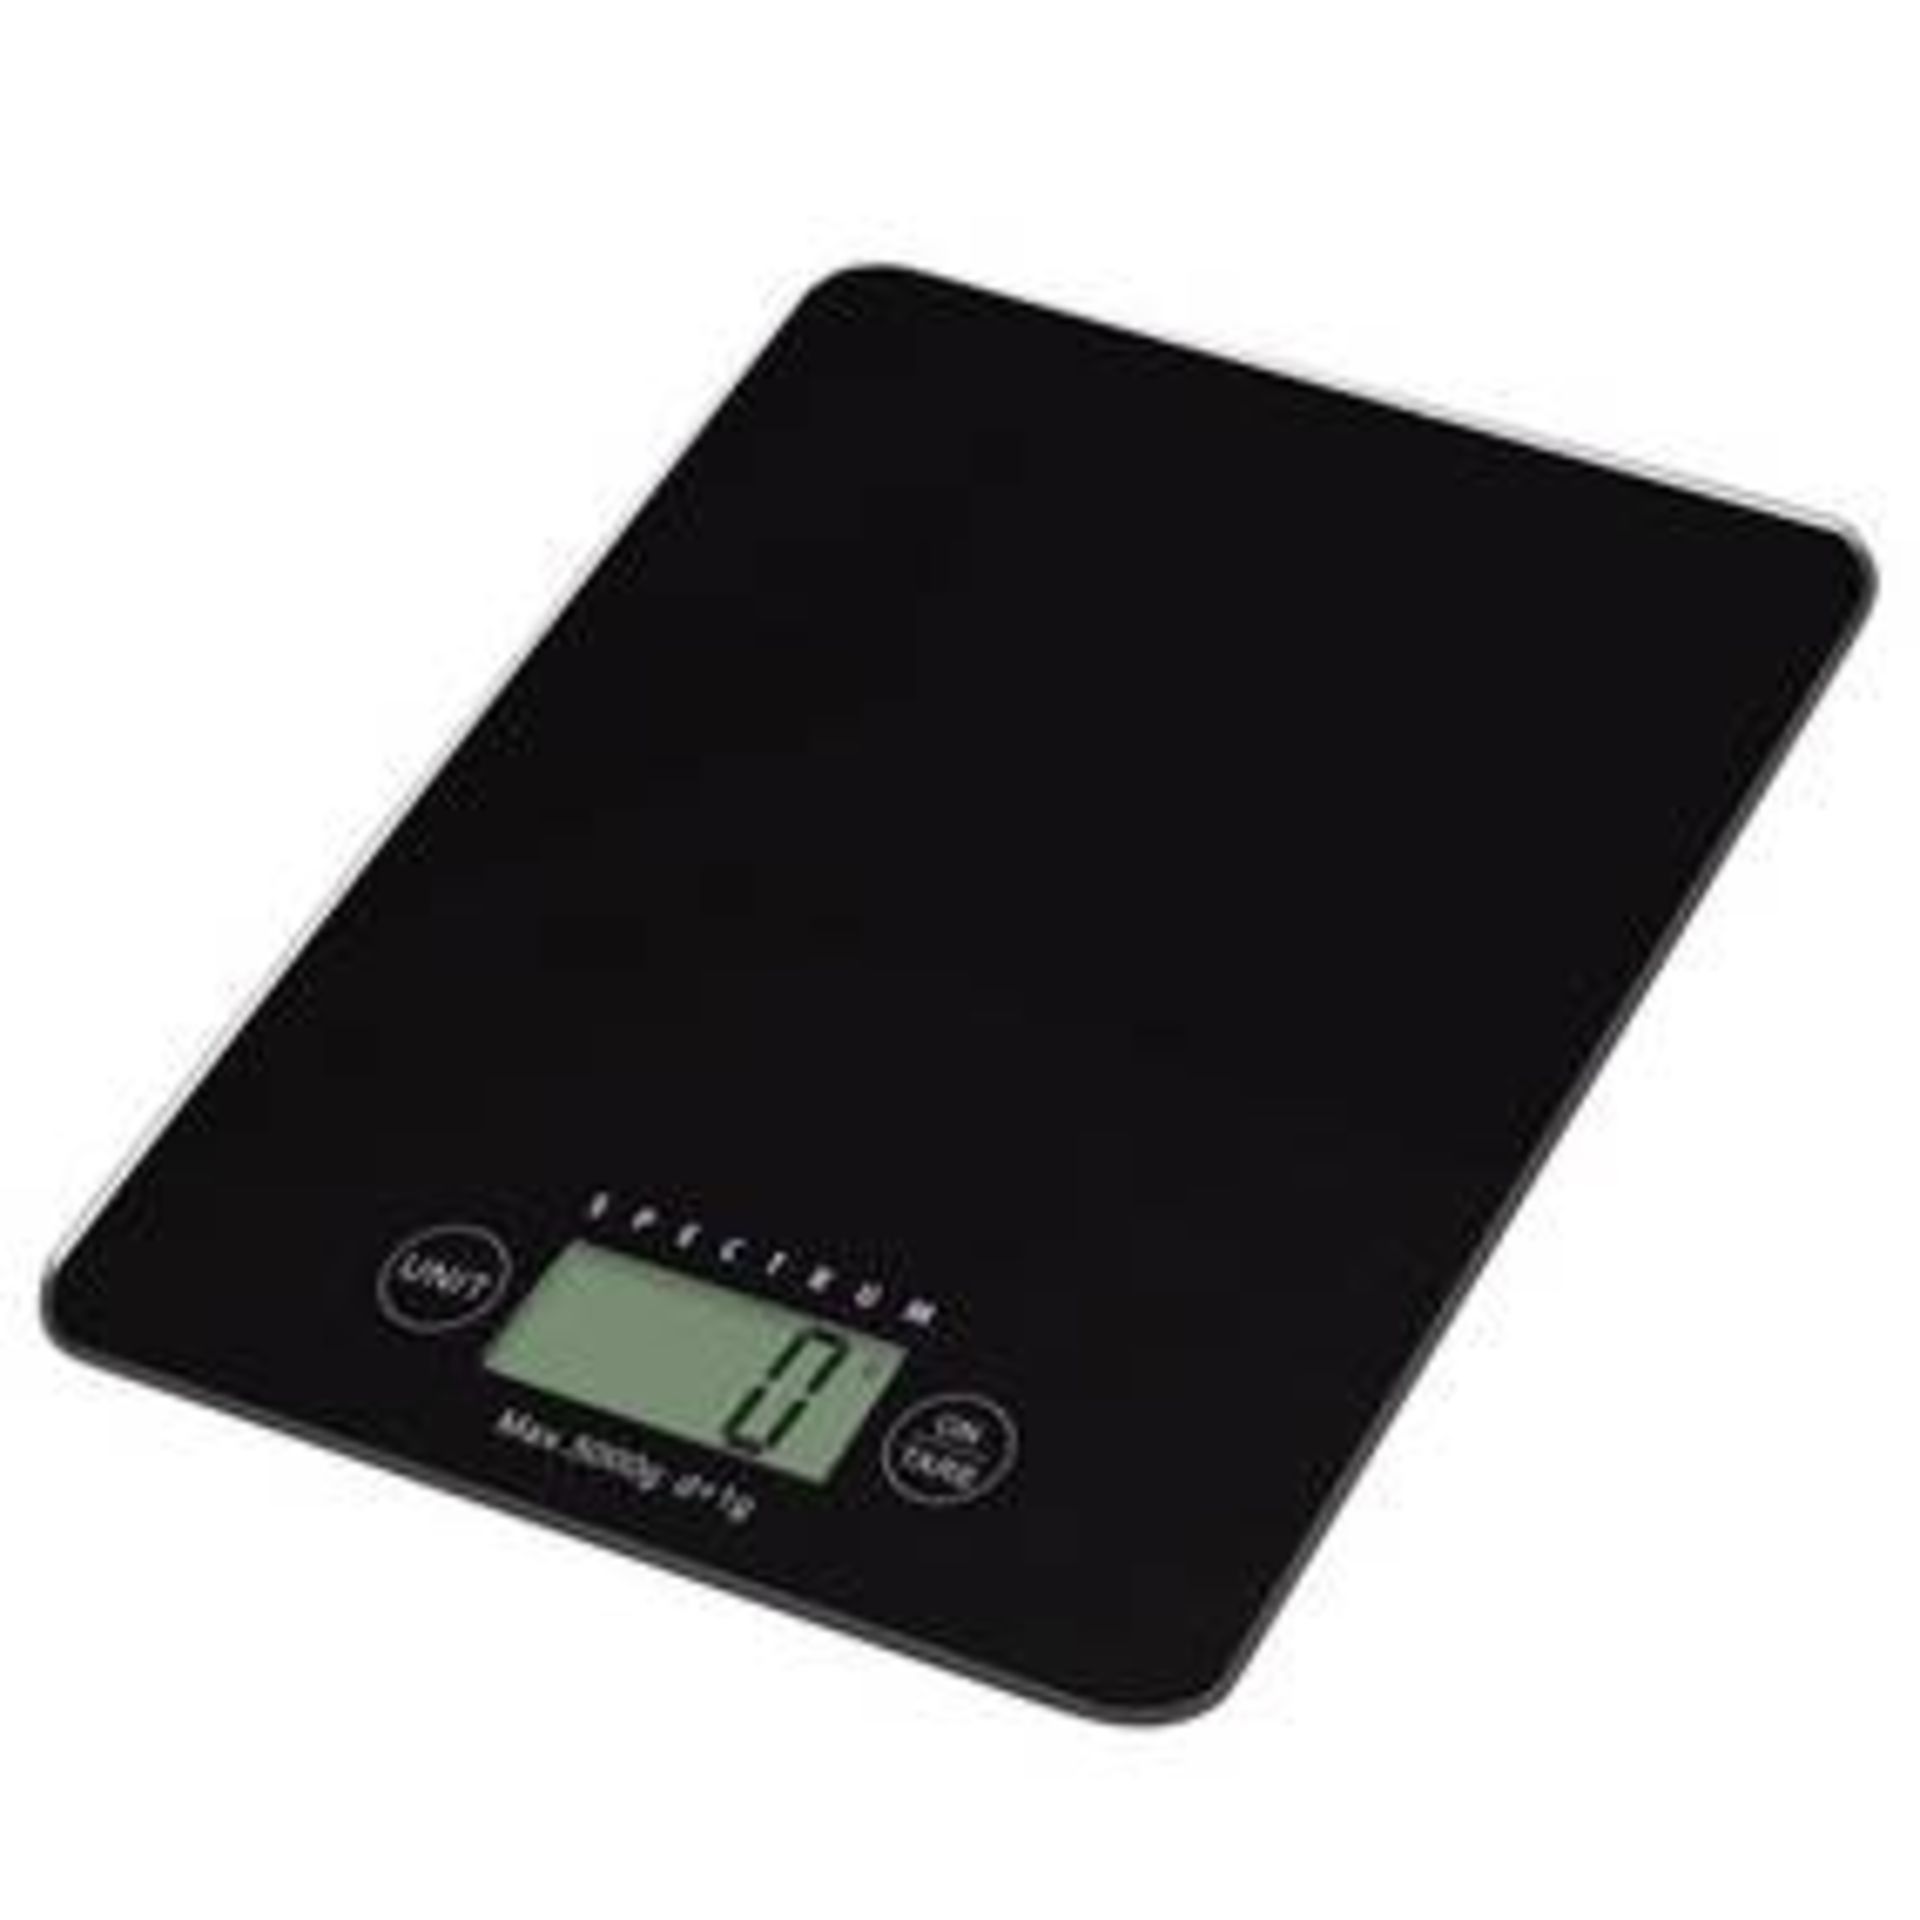 V *TRADE QTY* Brand New Digital Kitchen Scales with Large LCD Display in lbs OZs and Grams (Styles - Image 2 of 4